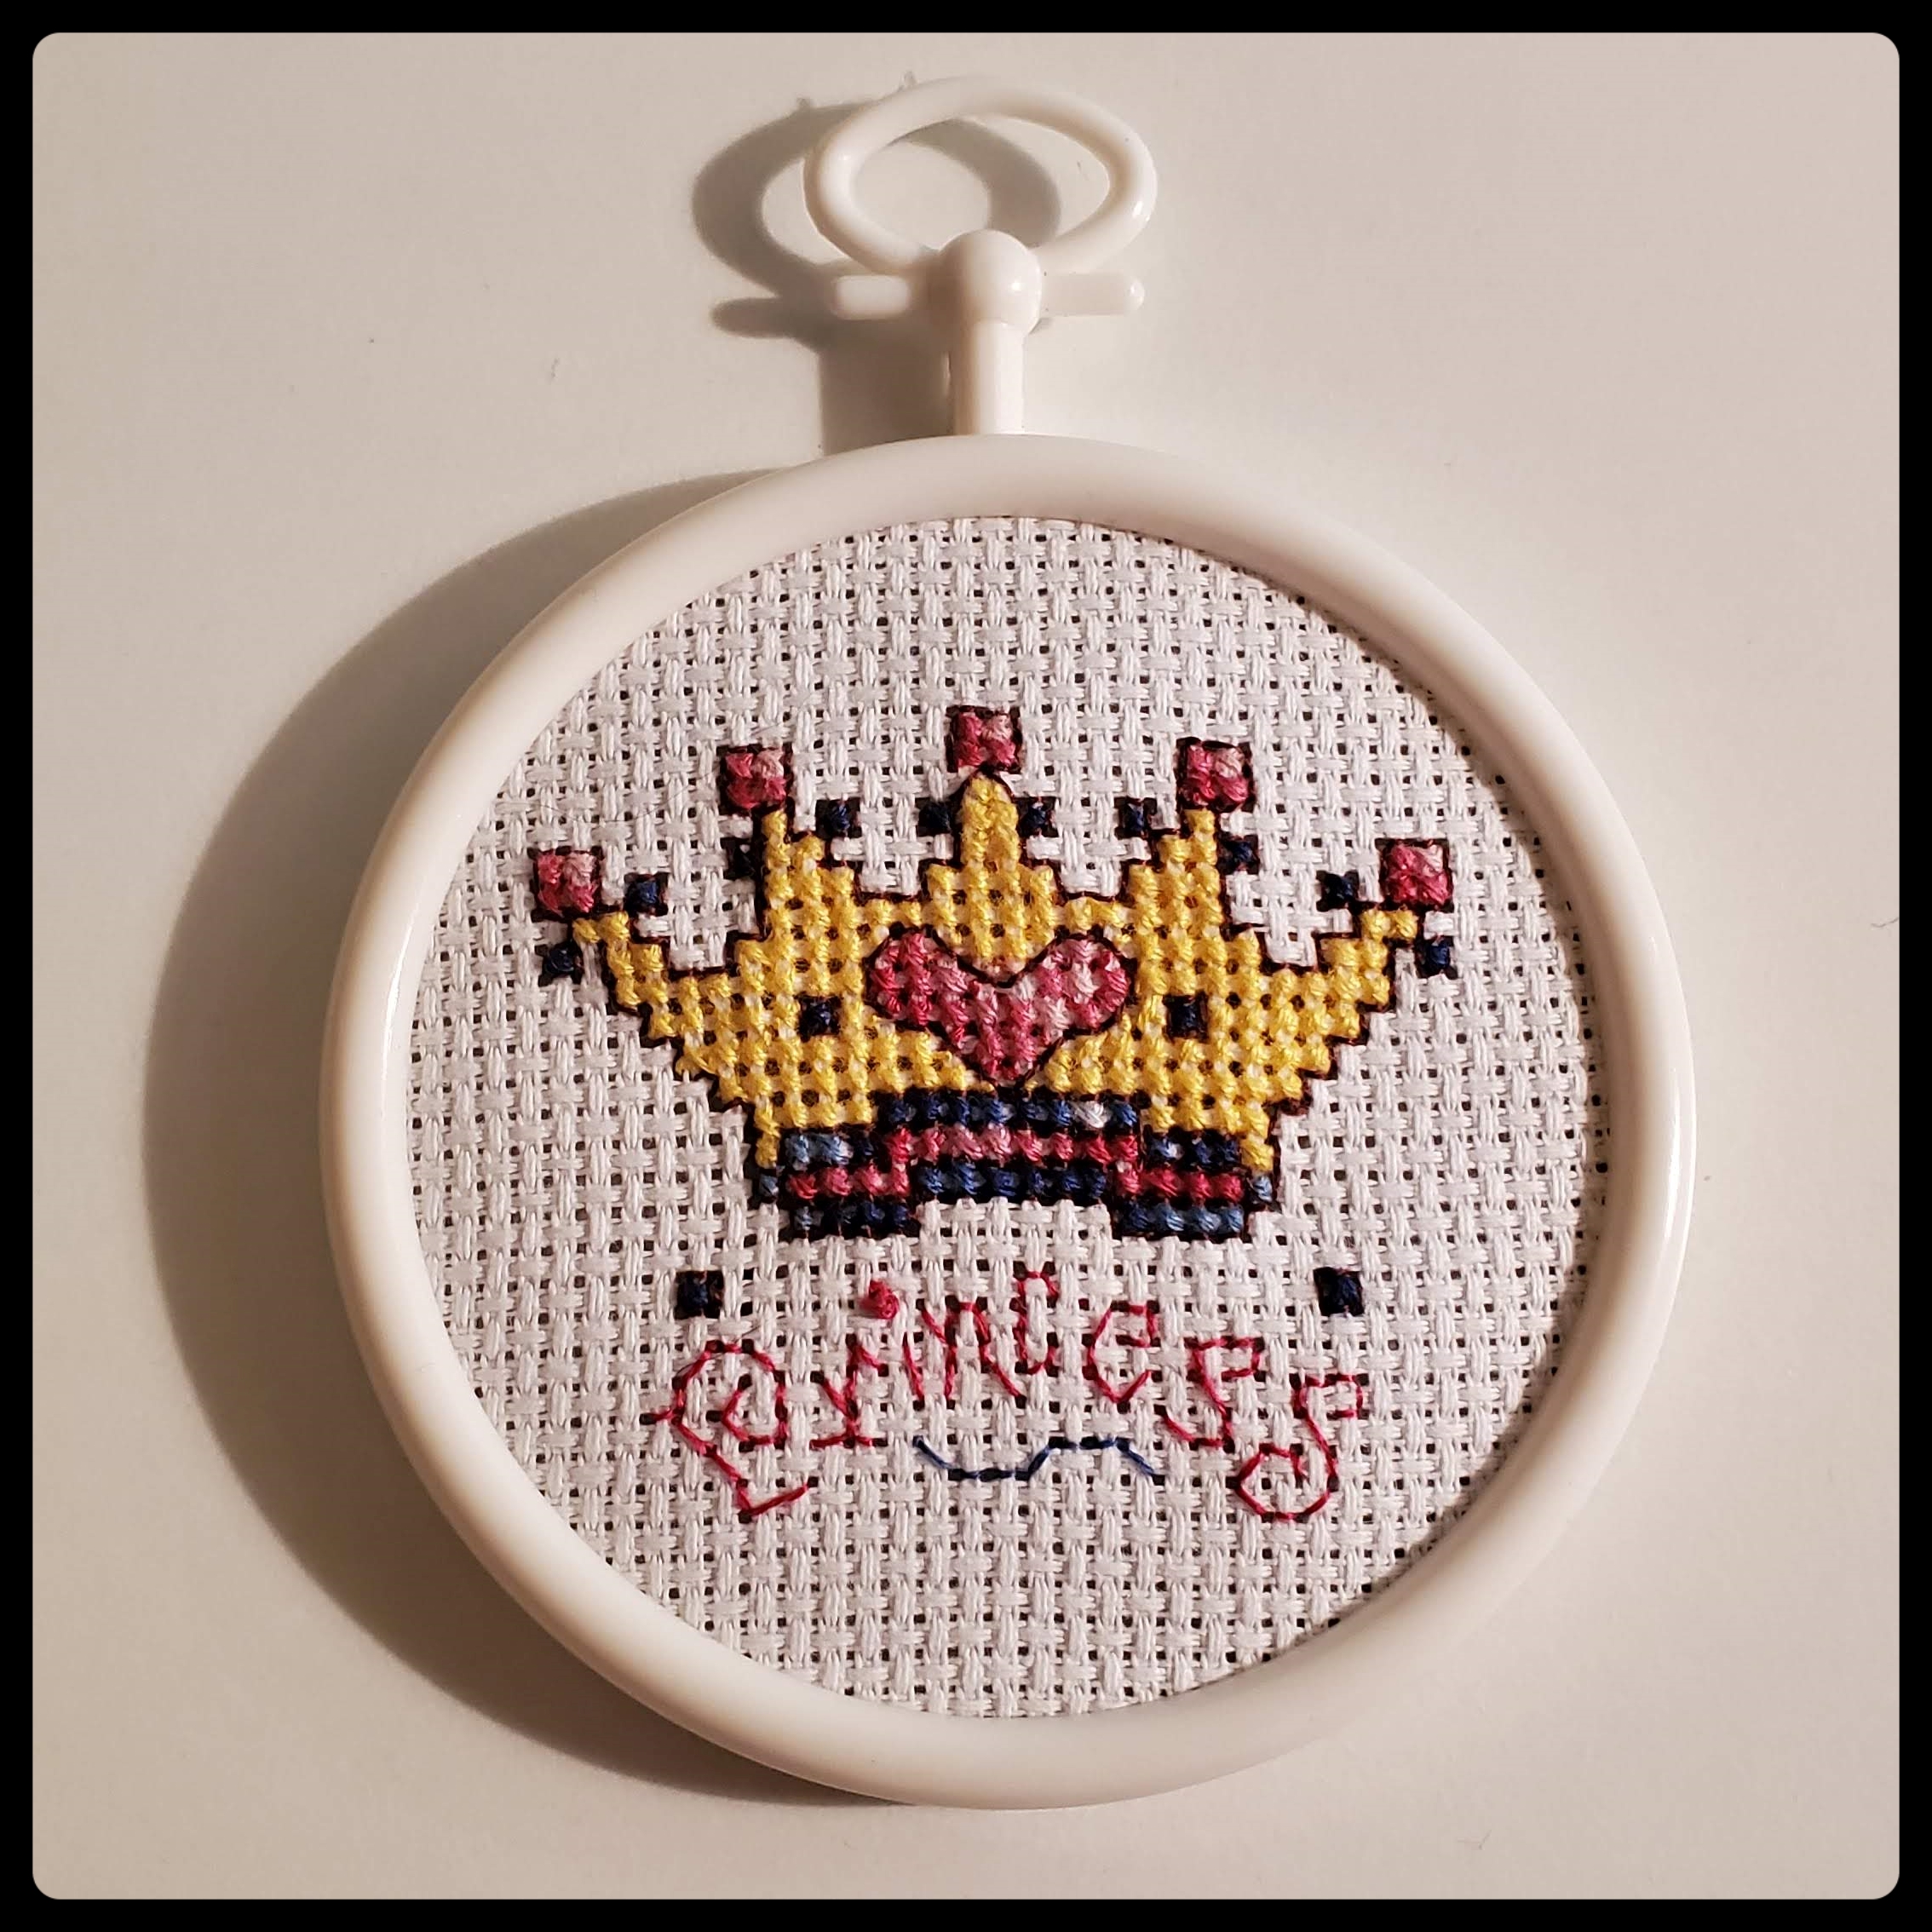 Stitching Time for a Princess